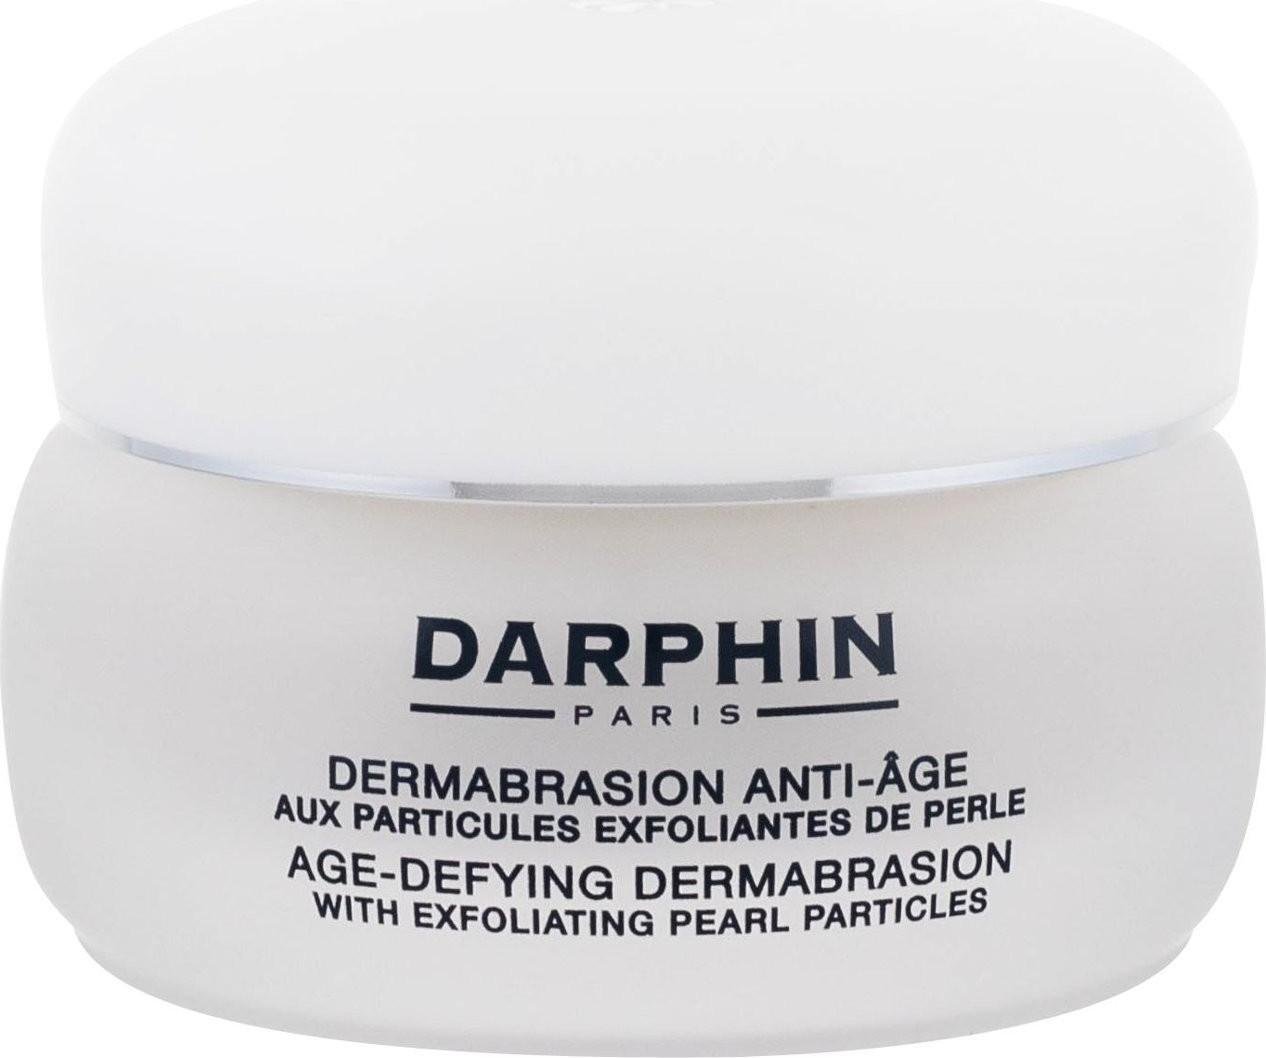 Darphin Specific Care Age-Defying Dermabrasion